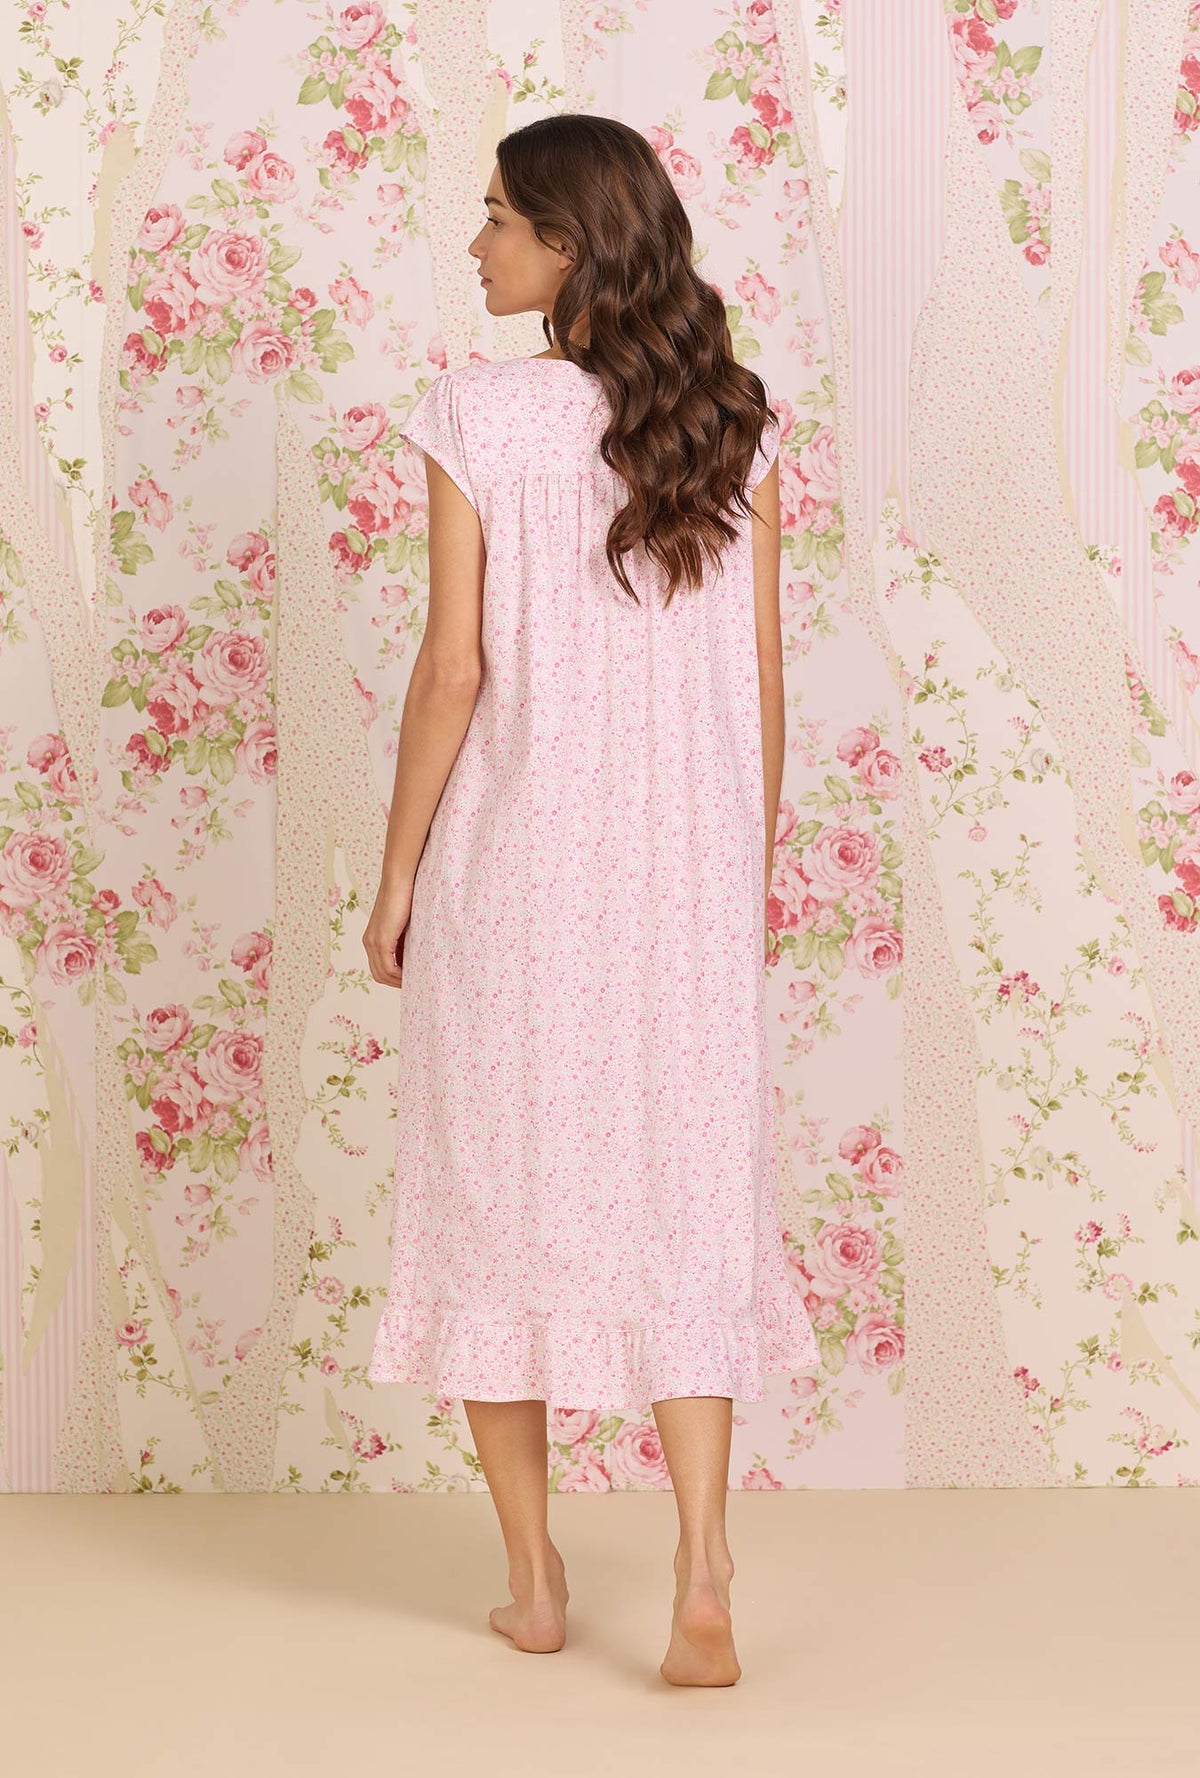  A lady wearing pink Cotton Knit Long Cap Sleeve Nightgown with spring garden print